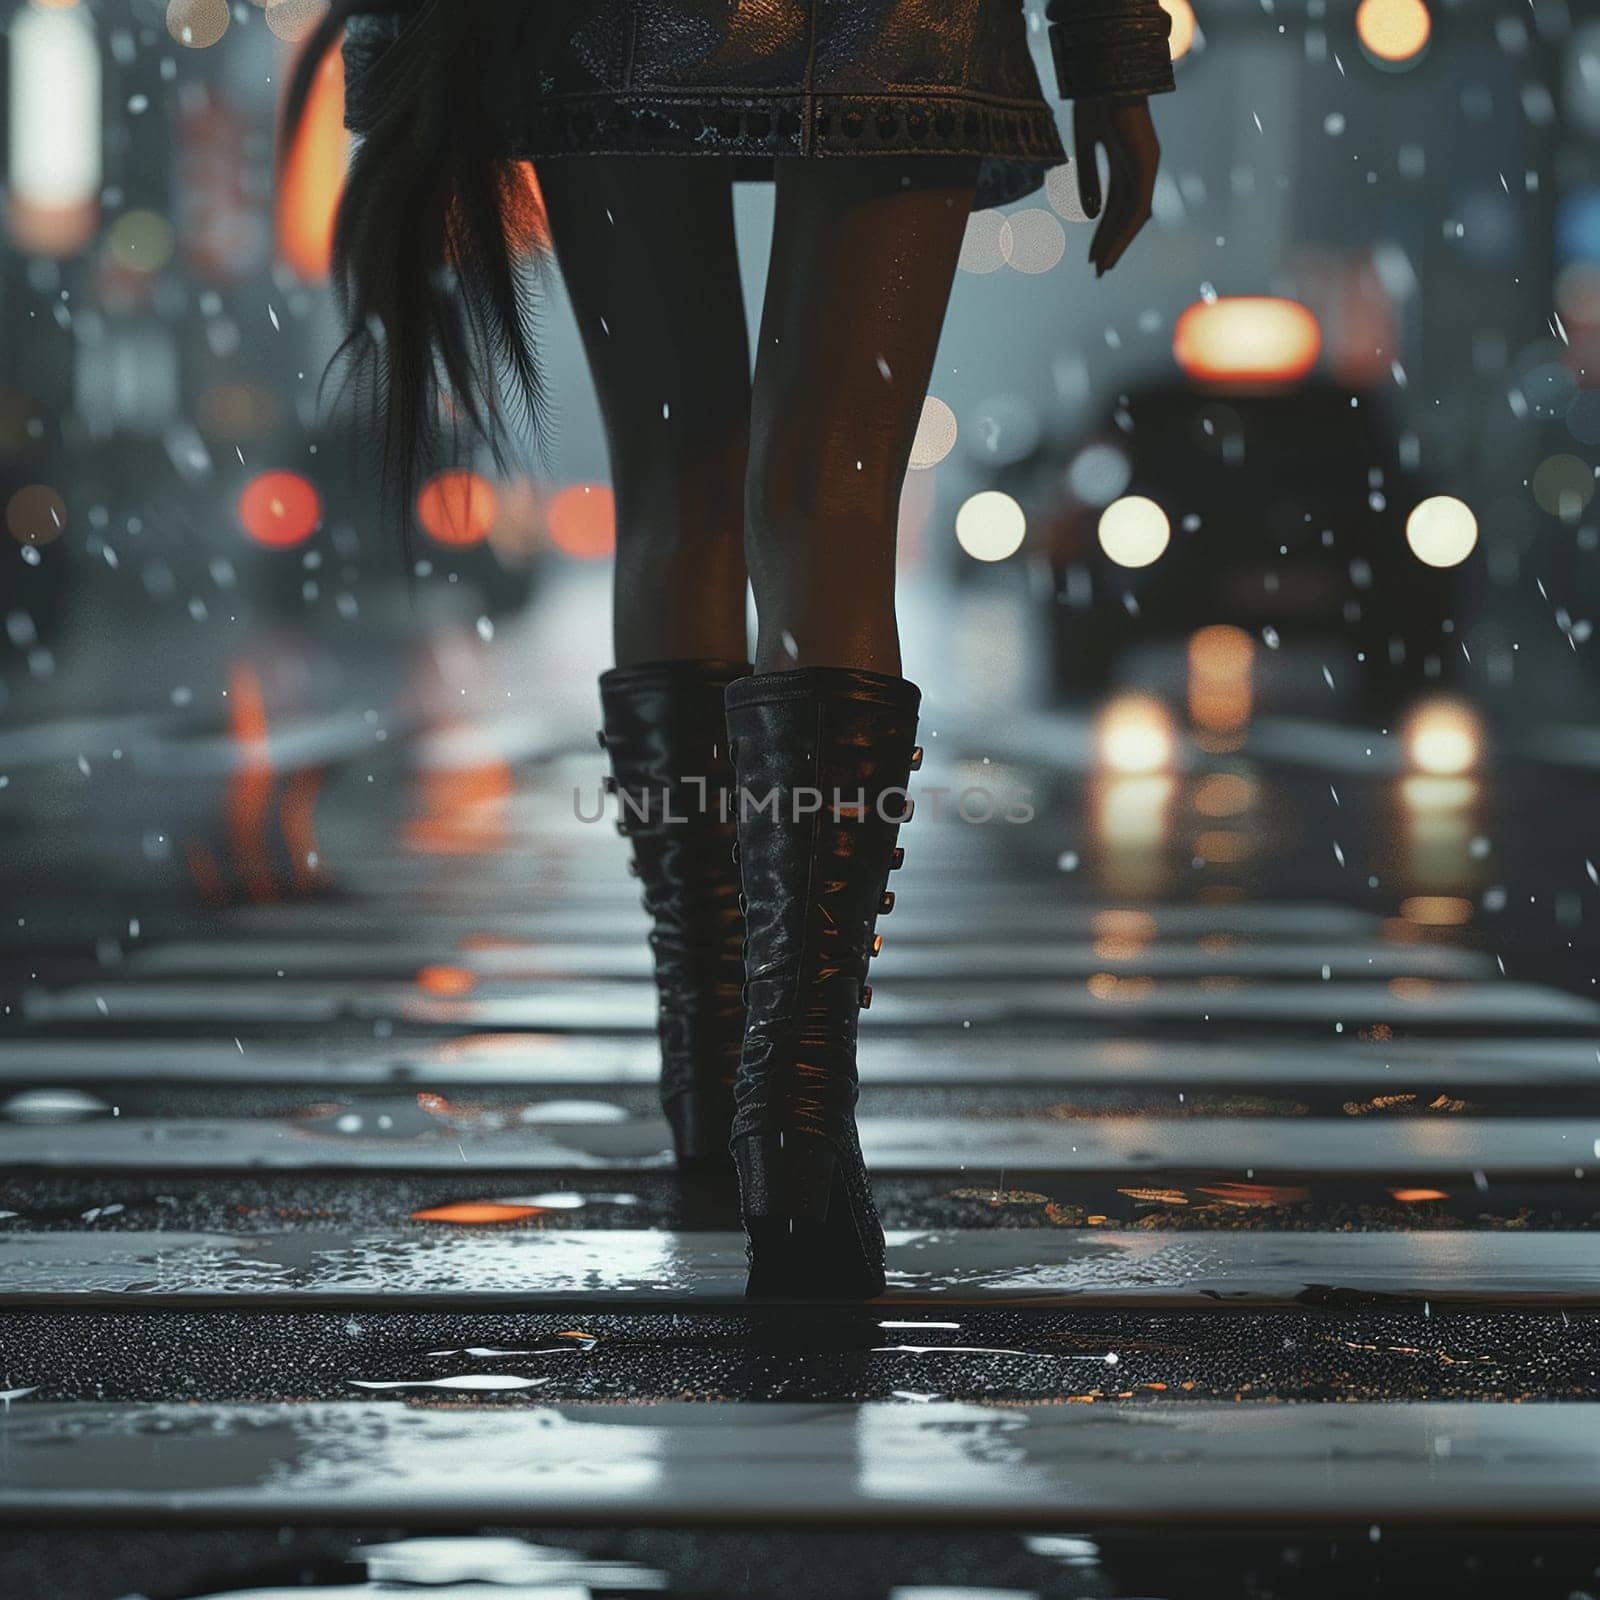 A professional photo of a girl walking along the road. Feet, boots, asphalt, pedestrian crossing. High quality illustration